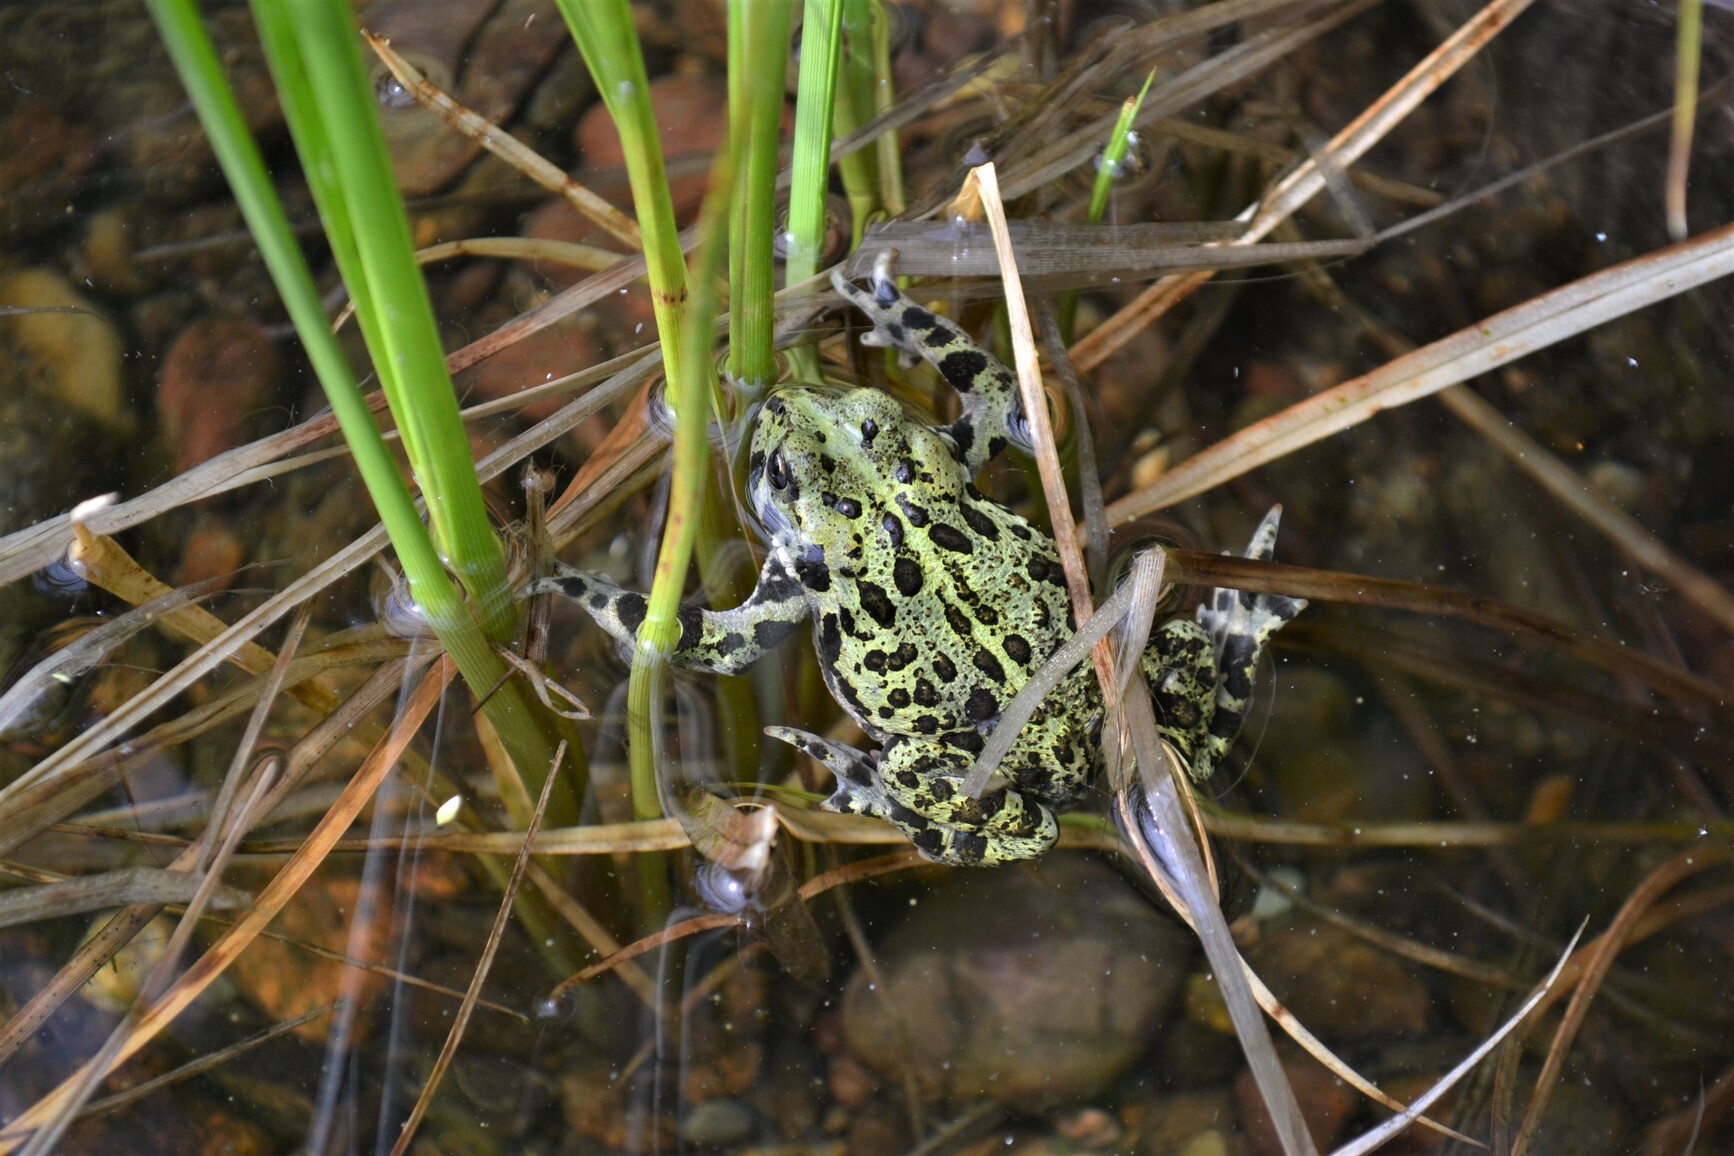 A close up of a frog.